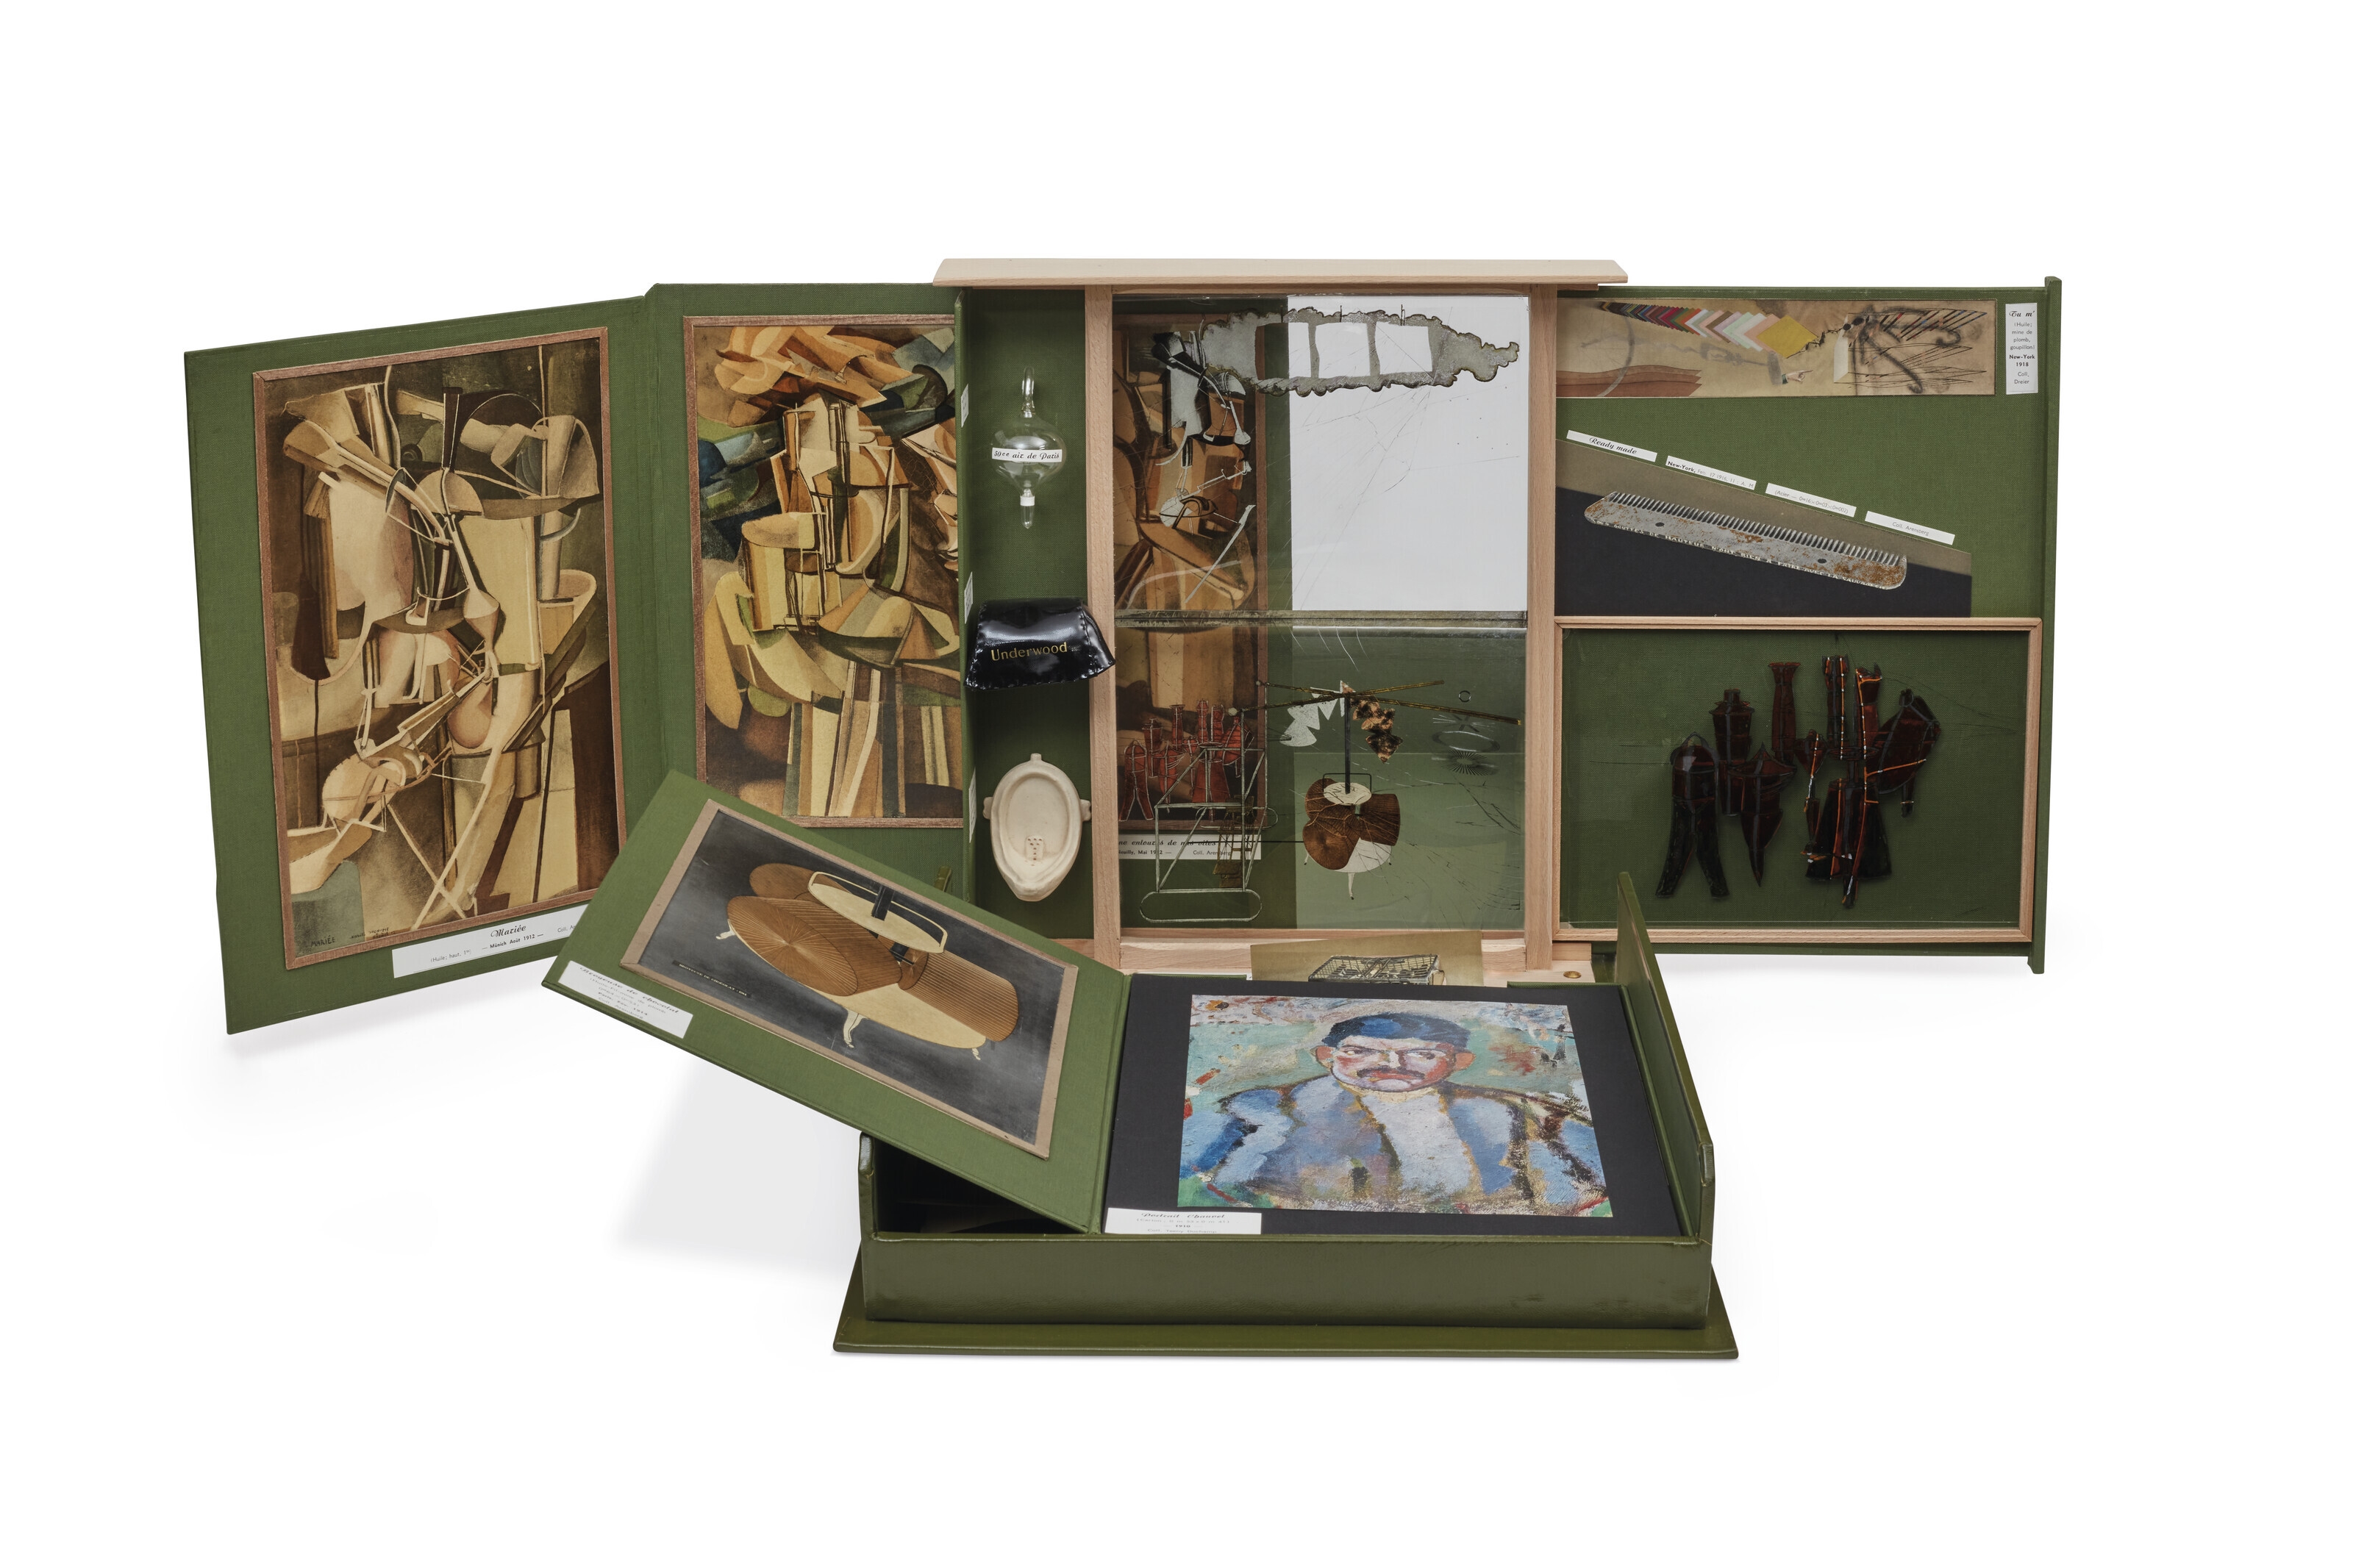 Artwork by Marcel Duchamp, De ou par Marcel Duchamp ou Rrose Sélavy (La Boîte-en-valise), series G, Made of green leather covered wooden and cardboard box with green linen lining, containing 80 miniature replicas and reproductions